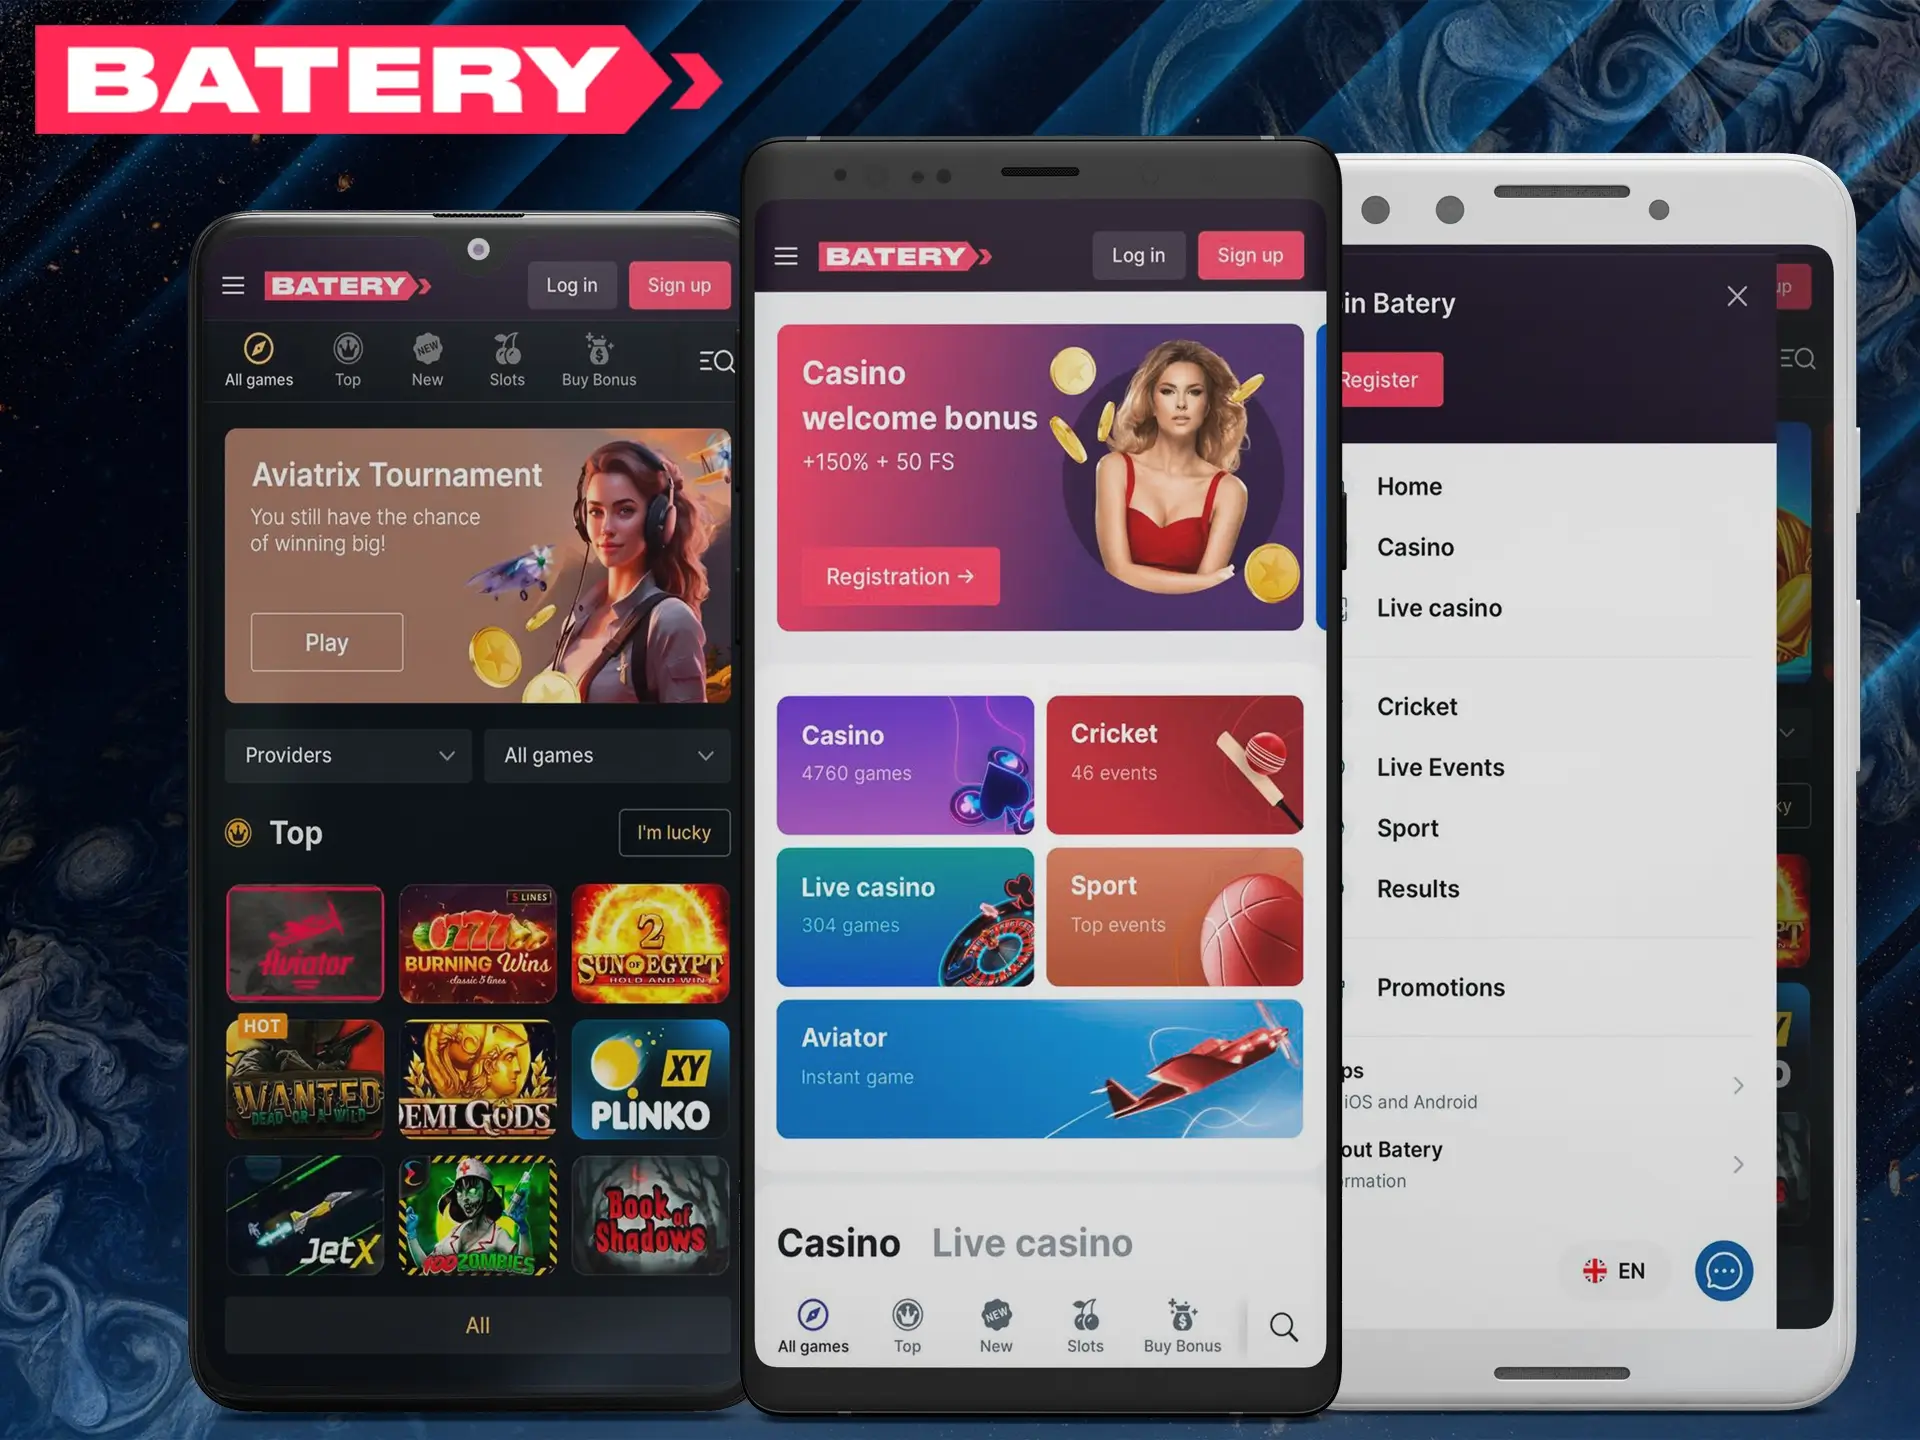 Most Android devices already have the Batery mobile app available for download.